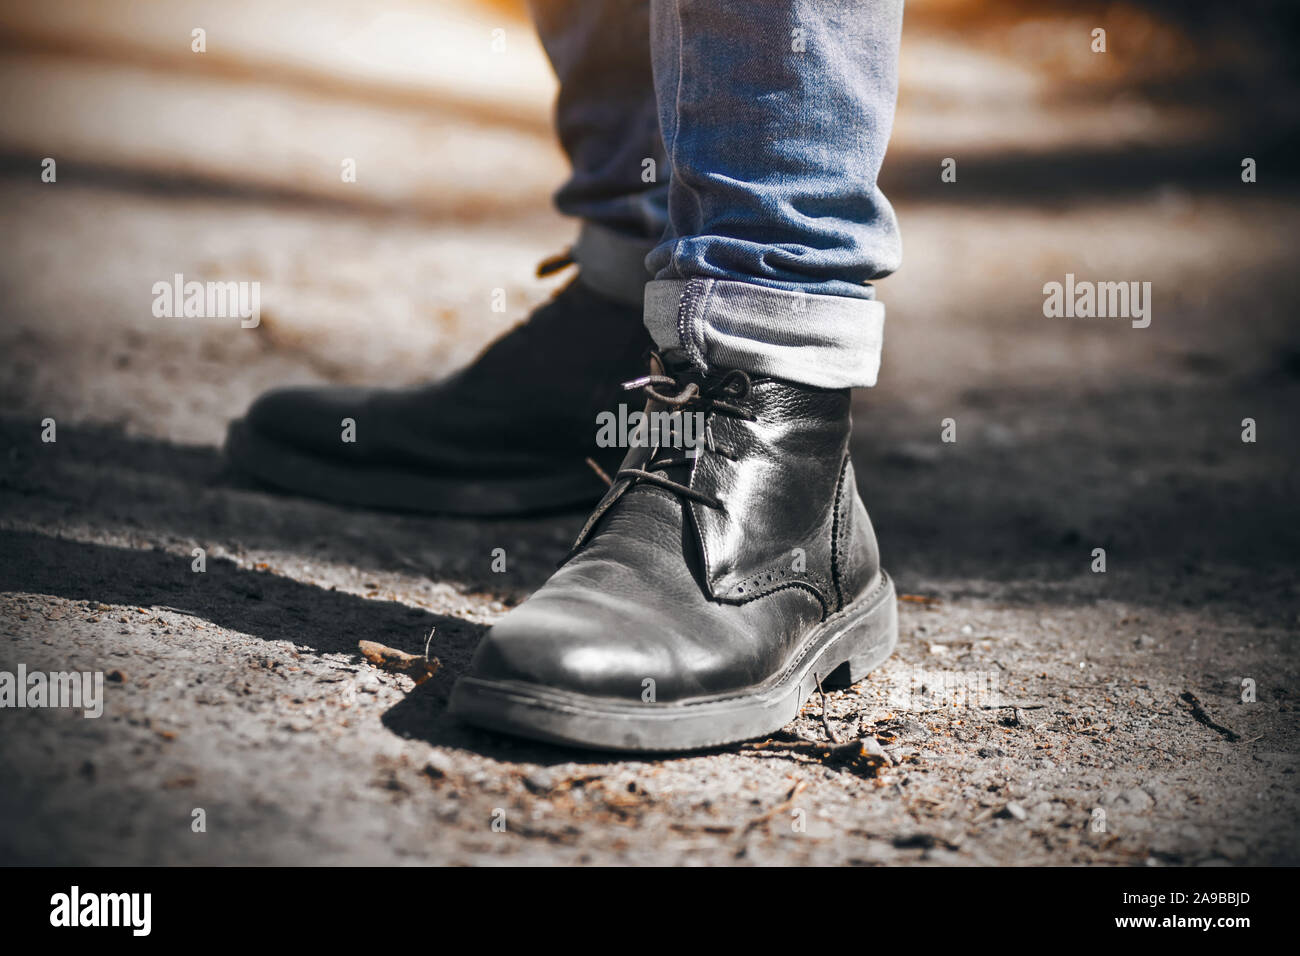 New trainers on a man wearing blue jeans Stock Photo - Alamy